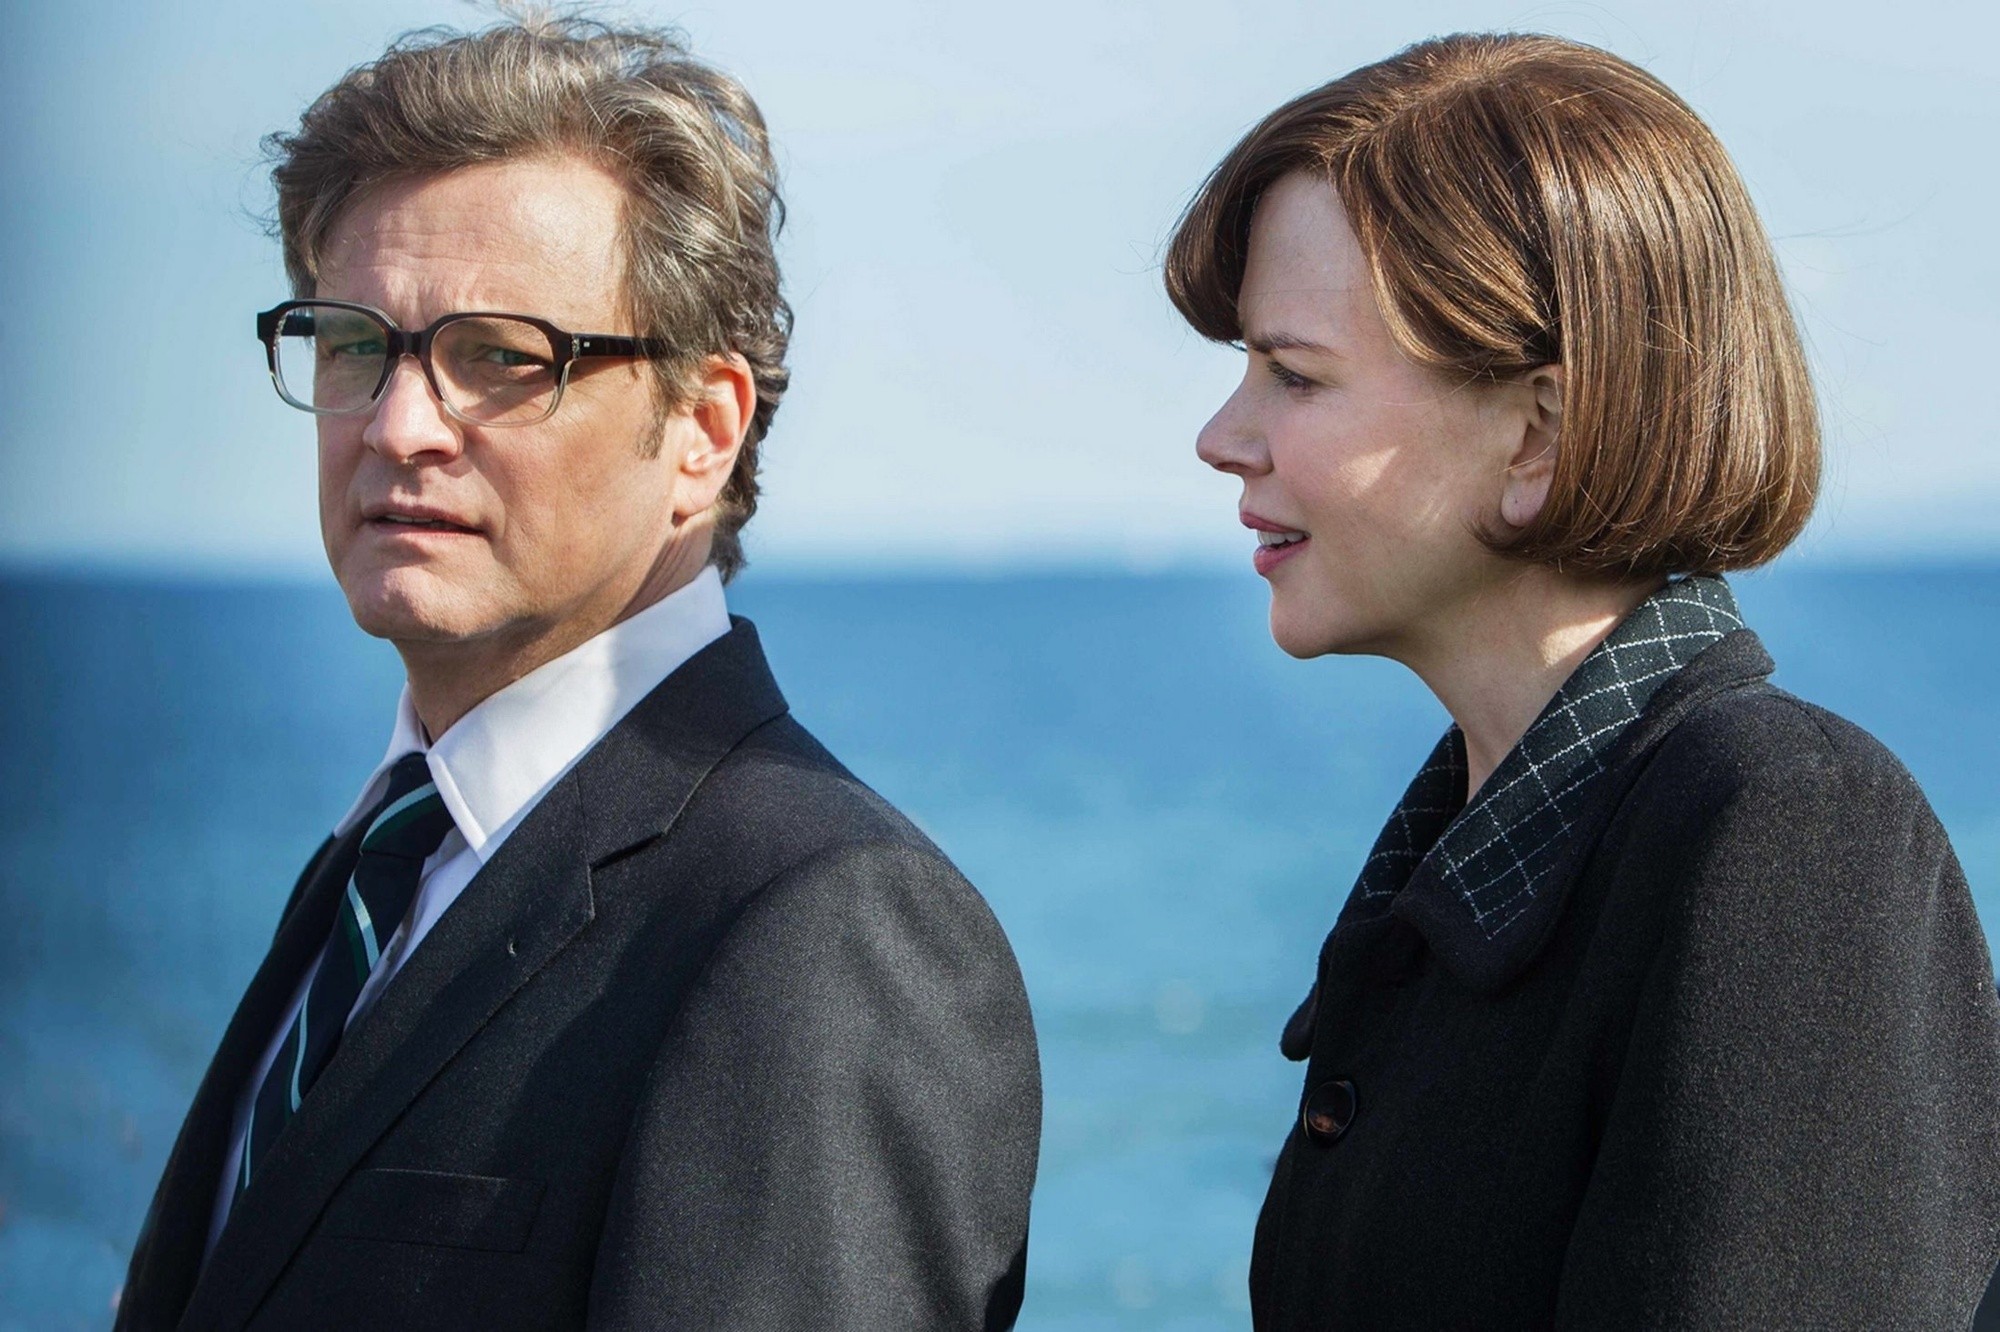 Colin Firth stars as Eric Lomax and Nicole Kidman stars as Patricia Wallace in The Weinstein Company's The Railway Man (2014). Photo credit by Jaap Buitendijk.